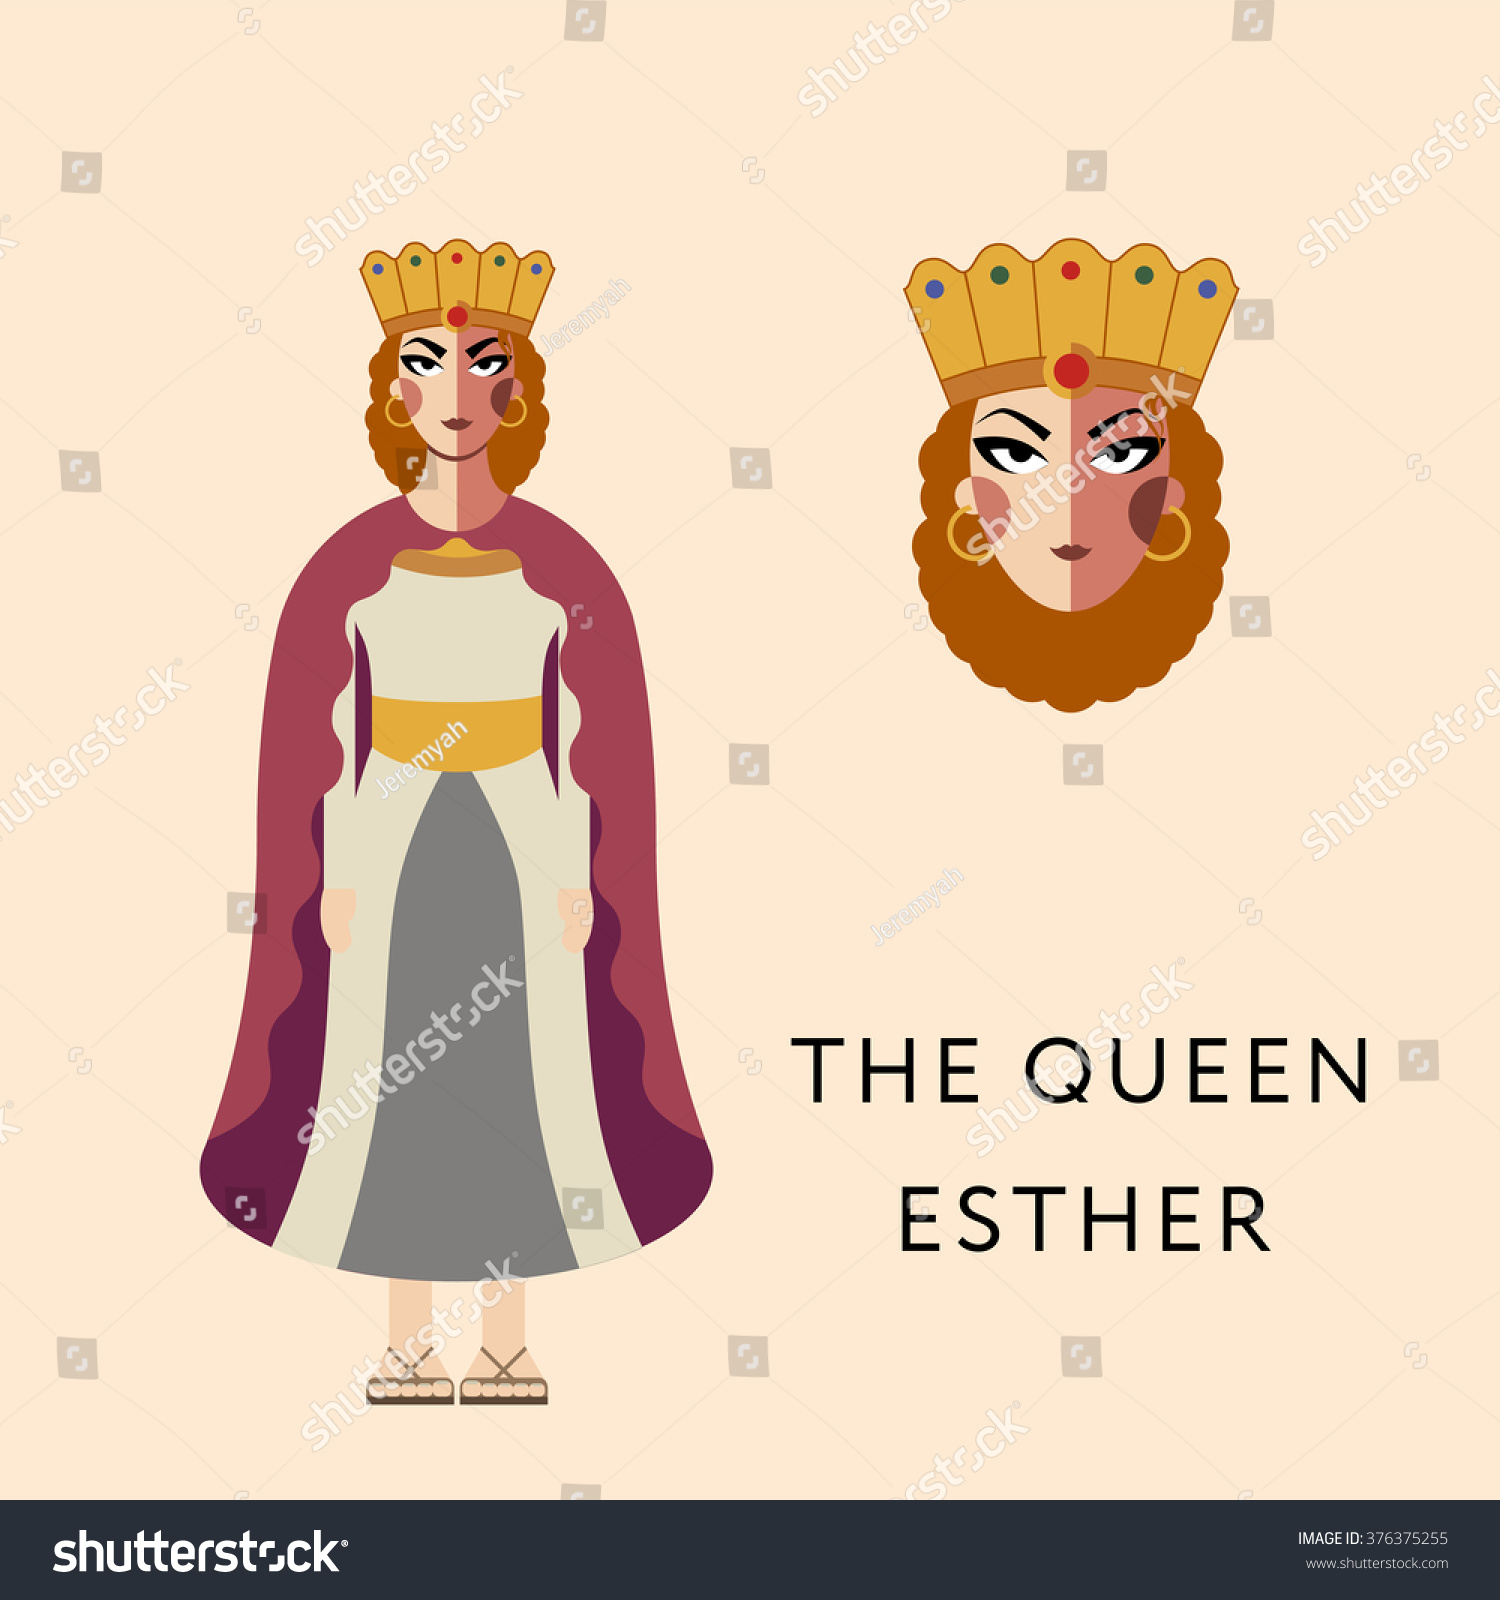 queen esther clipart free - photo #25